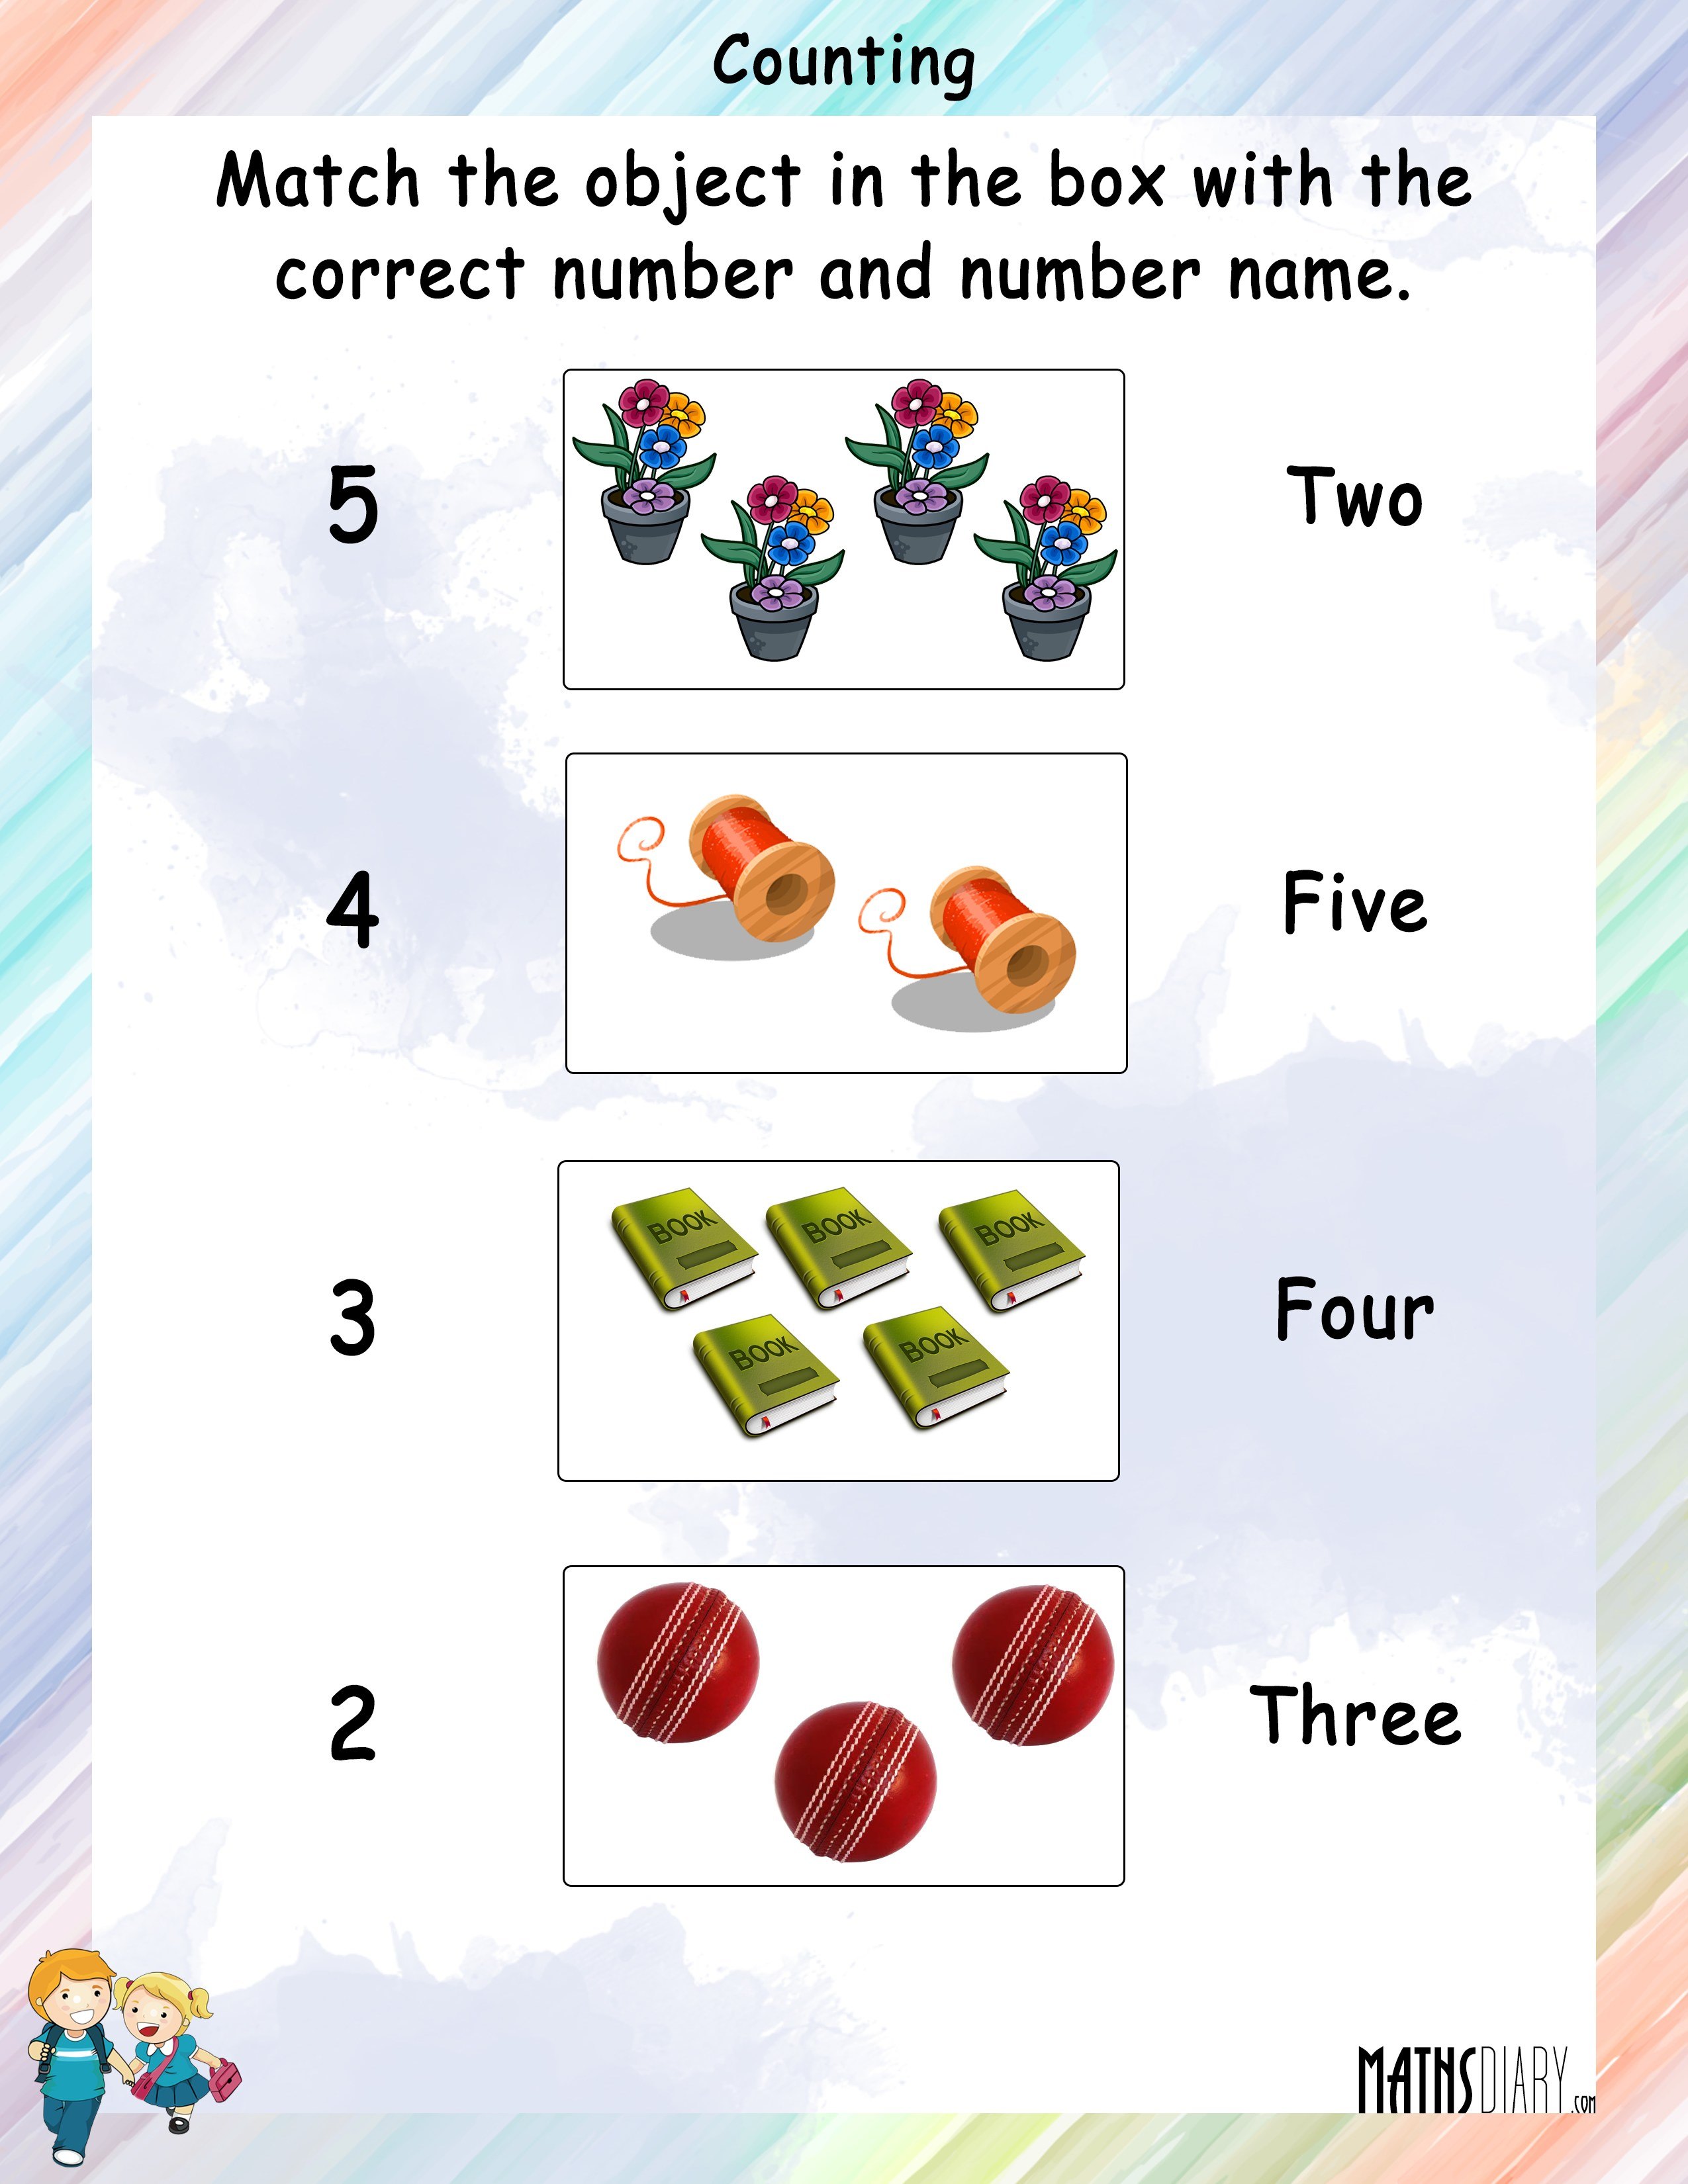 count-the-objects-and-match-with-the-numbers-math-worksheets